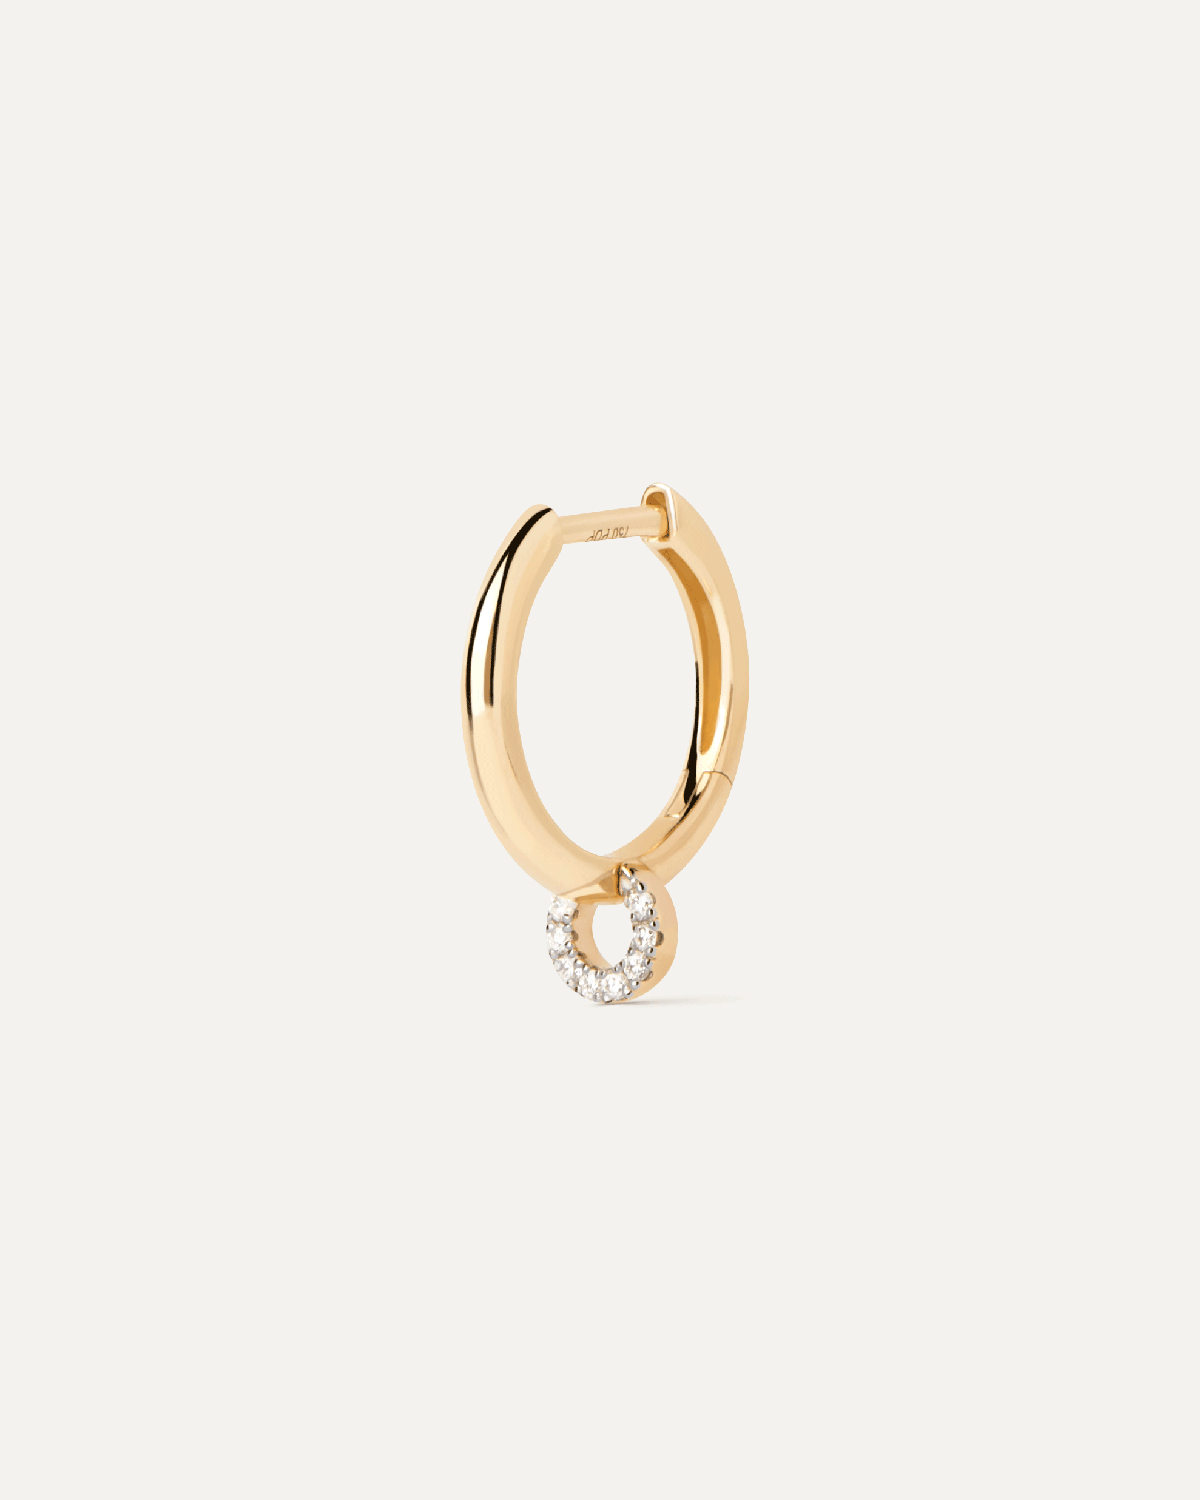 Diamonds and gold Loop single hoop. Single huggie in solid yellow gold paired with a swinging lab-grown diamond circle pendant. Get the latest arrival from PDPAOLA. Place your order safely and get this Best Seller.